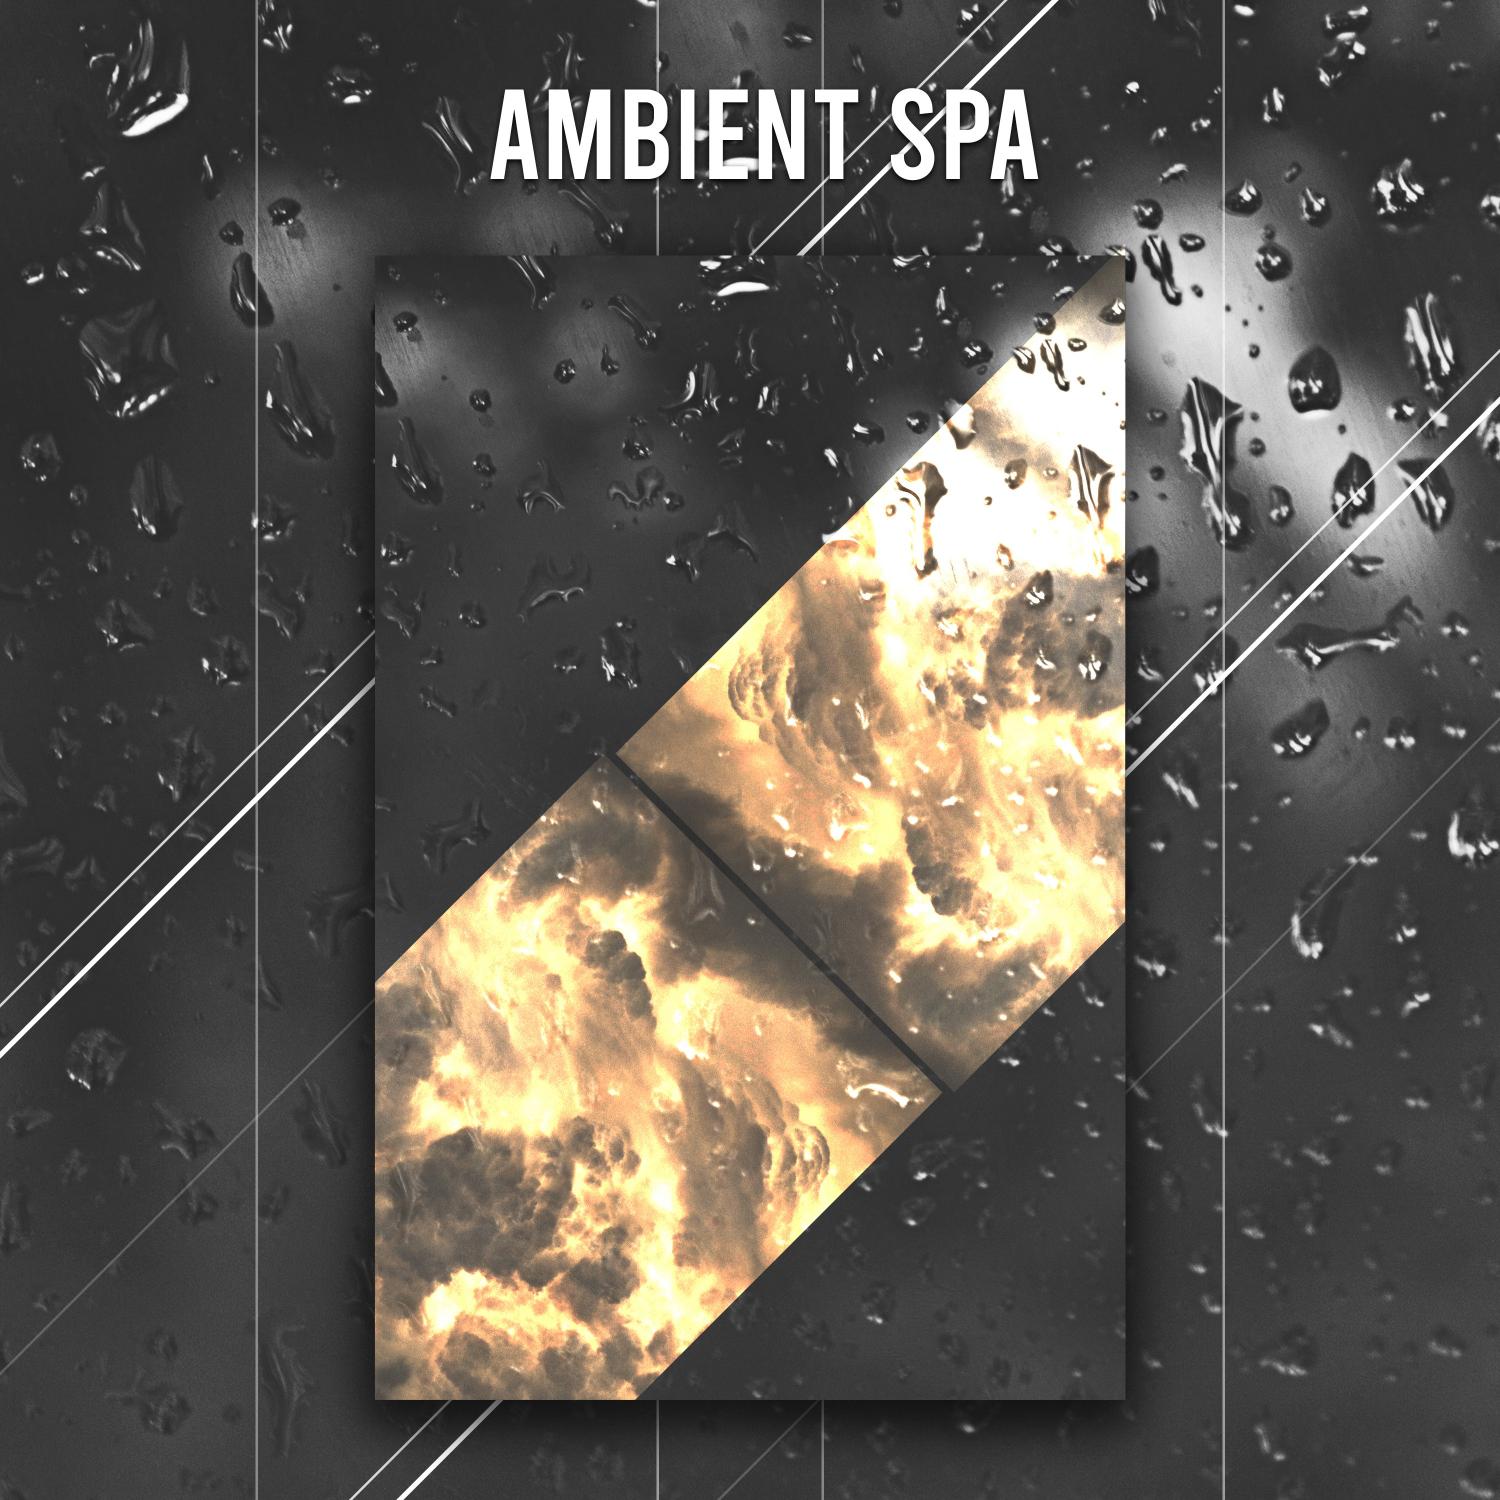 12 Ambient Spa and White Noise Meditation Tracks: Natural Rain for Relaxation